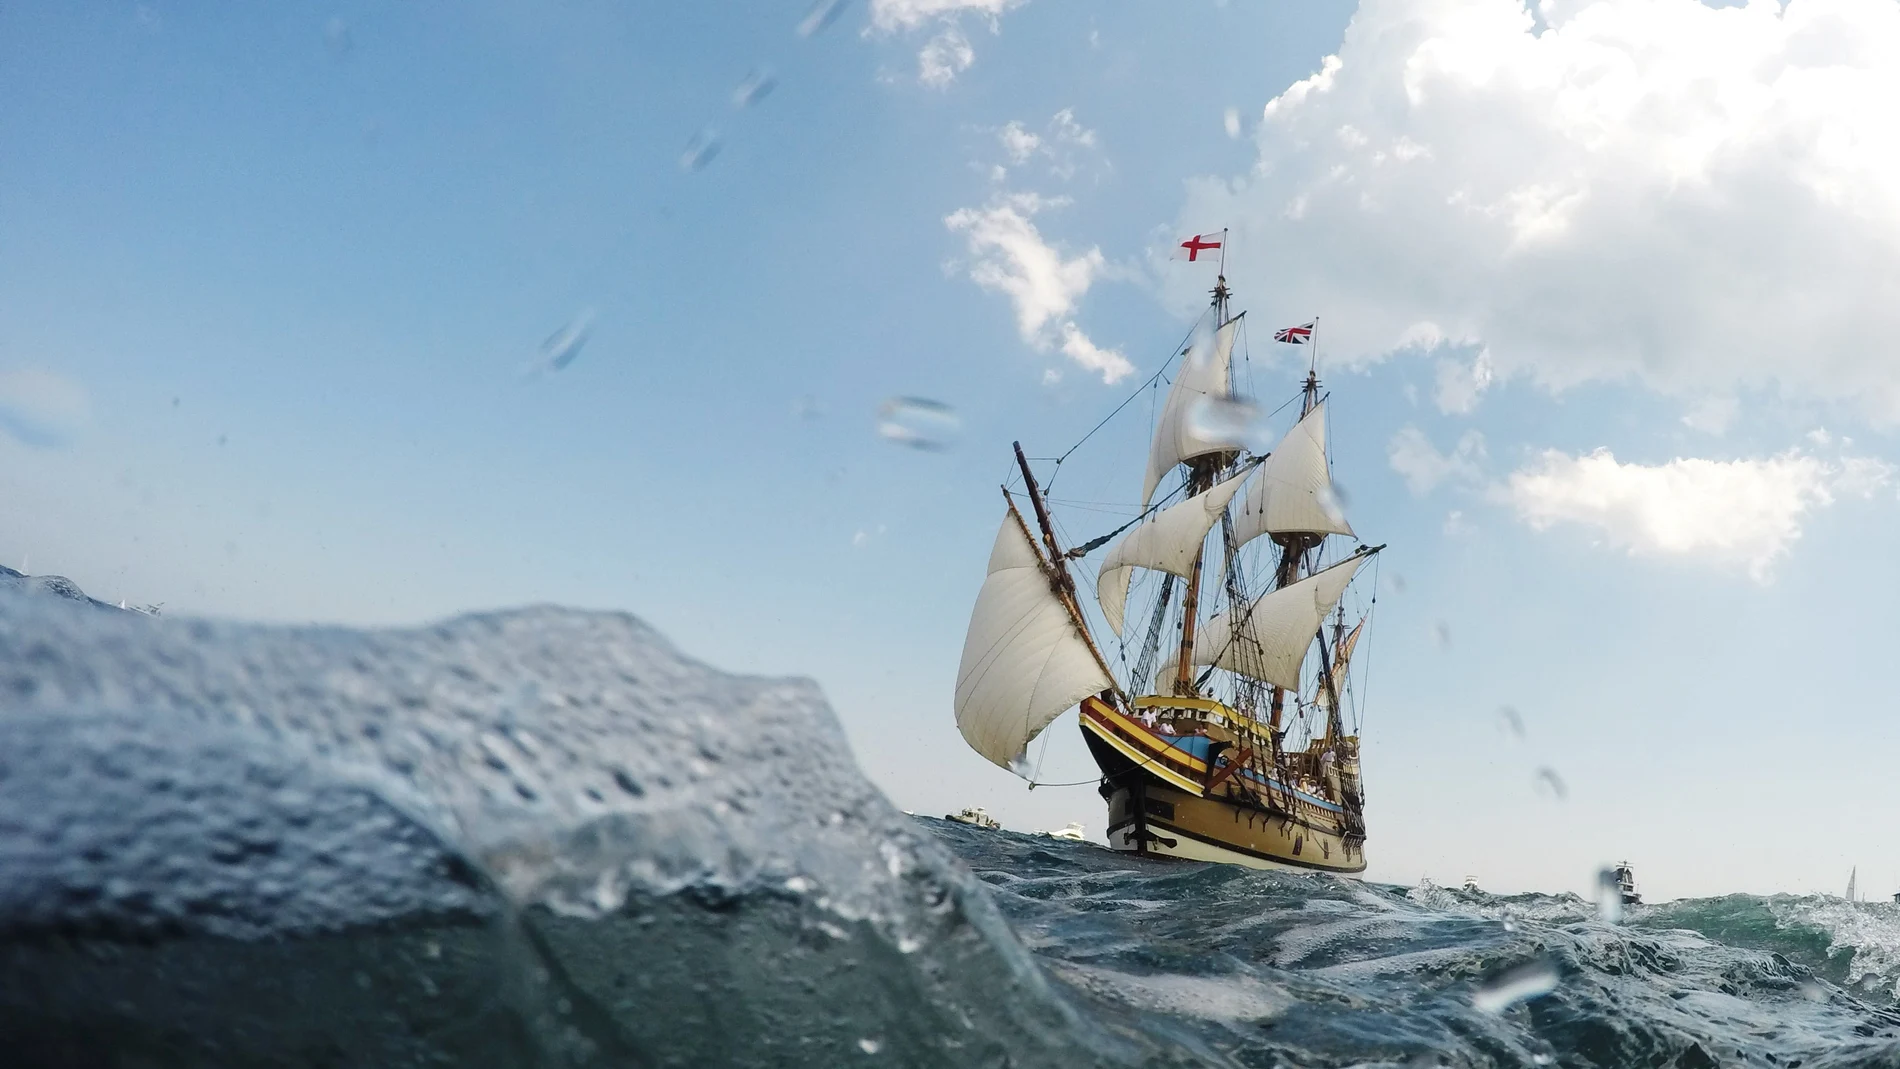 The newly renovated Mayflower II, a replica of the original ship that sailed from England in 1620, sails back to its berth in Plymouth, Massachusetts, U.S., August 10, 2020. REUTERS/Brian Snyder